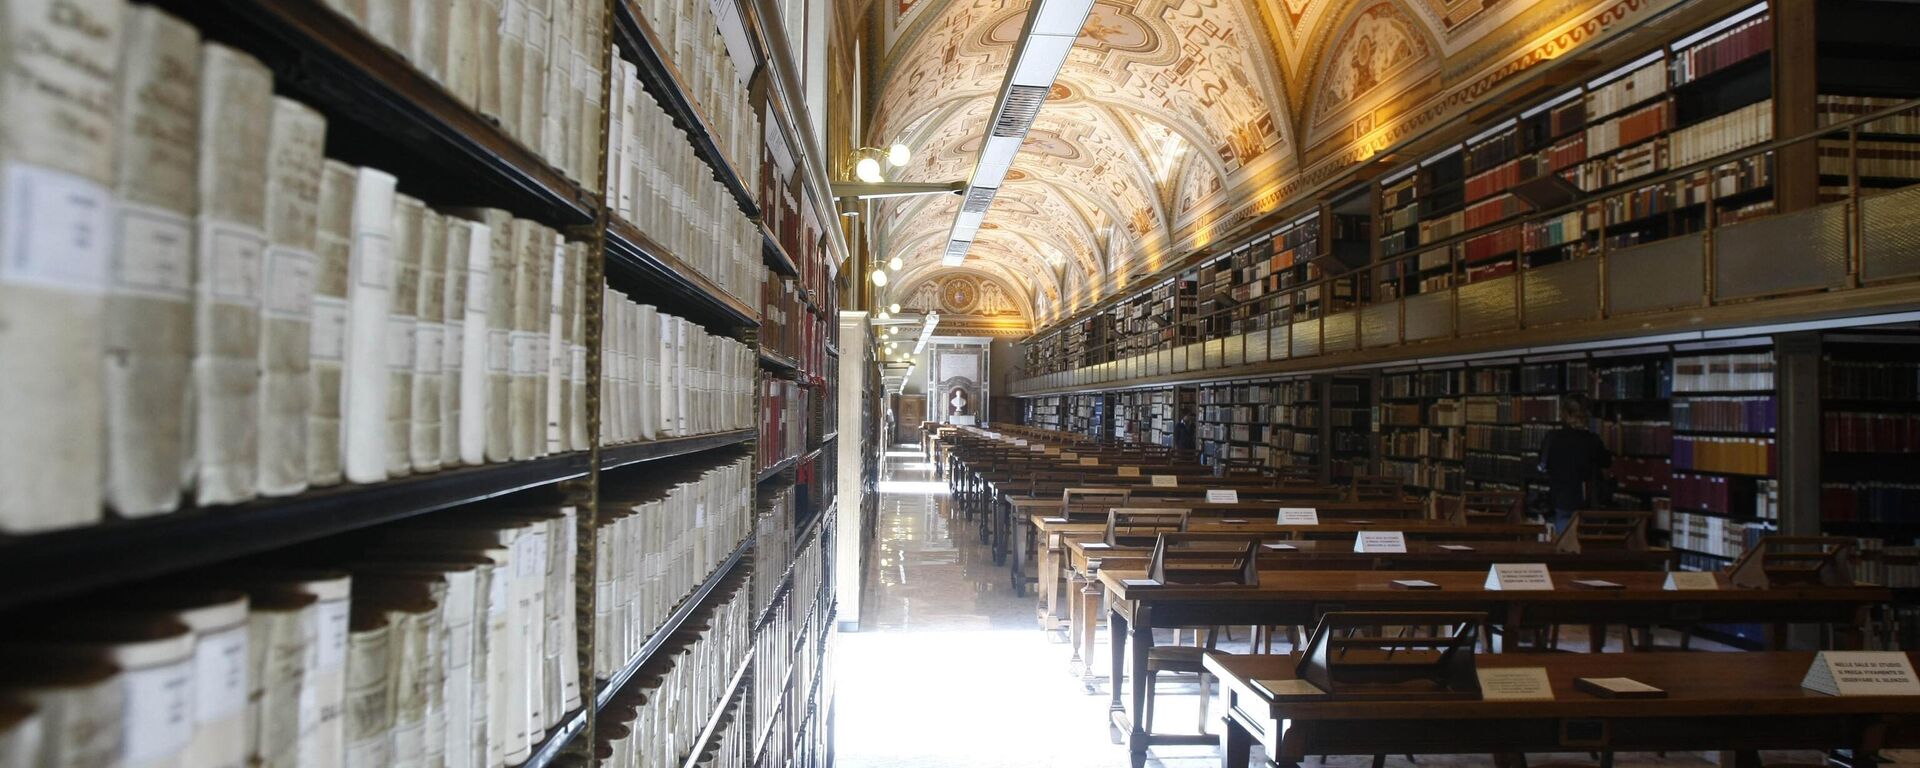 A view of the Vatican Apostolic Library, Vatican City, Monday, Sept. 13, 2010. The Vatican's Apostolic Library is reopening to scholars following a three-year renovation to improve its cataloguing and security measures. The library, which houses one of the world's best collections of illuminated manuscripts, opens its doors Sept. 20. Details will be announced Monday at a press conference. The library was started by Pope Nicholas V in the 1450's with an initial 350 Latin manuscripts. By the time Nicholas died in 1455, the collection had swelled to about 1,500 codices and was the largest in Europe. Today, the Vatican Library has about 65,000 manuscripts as well as the Codex B, the oldest known complete Bible, dating from about 325 A.D. and believed to have been one of the 50 bibles Emperor Constantine commissioned.  - Sputnik International, 1920, 10.11.2023